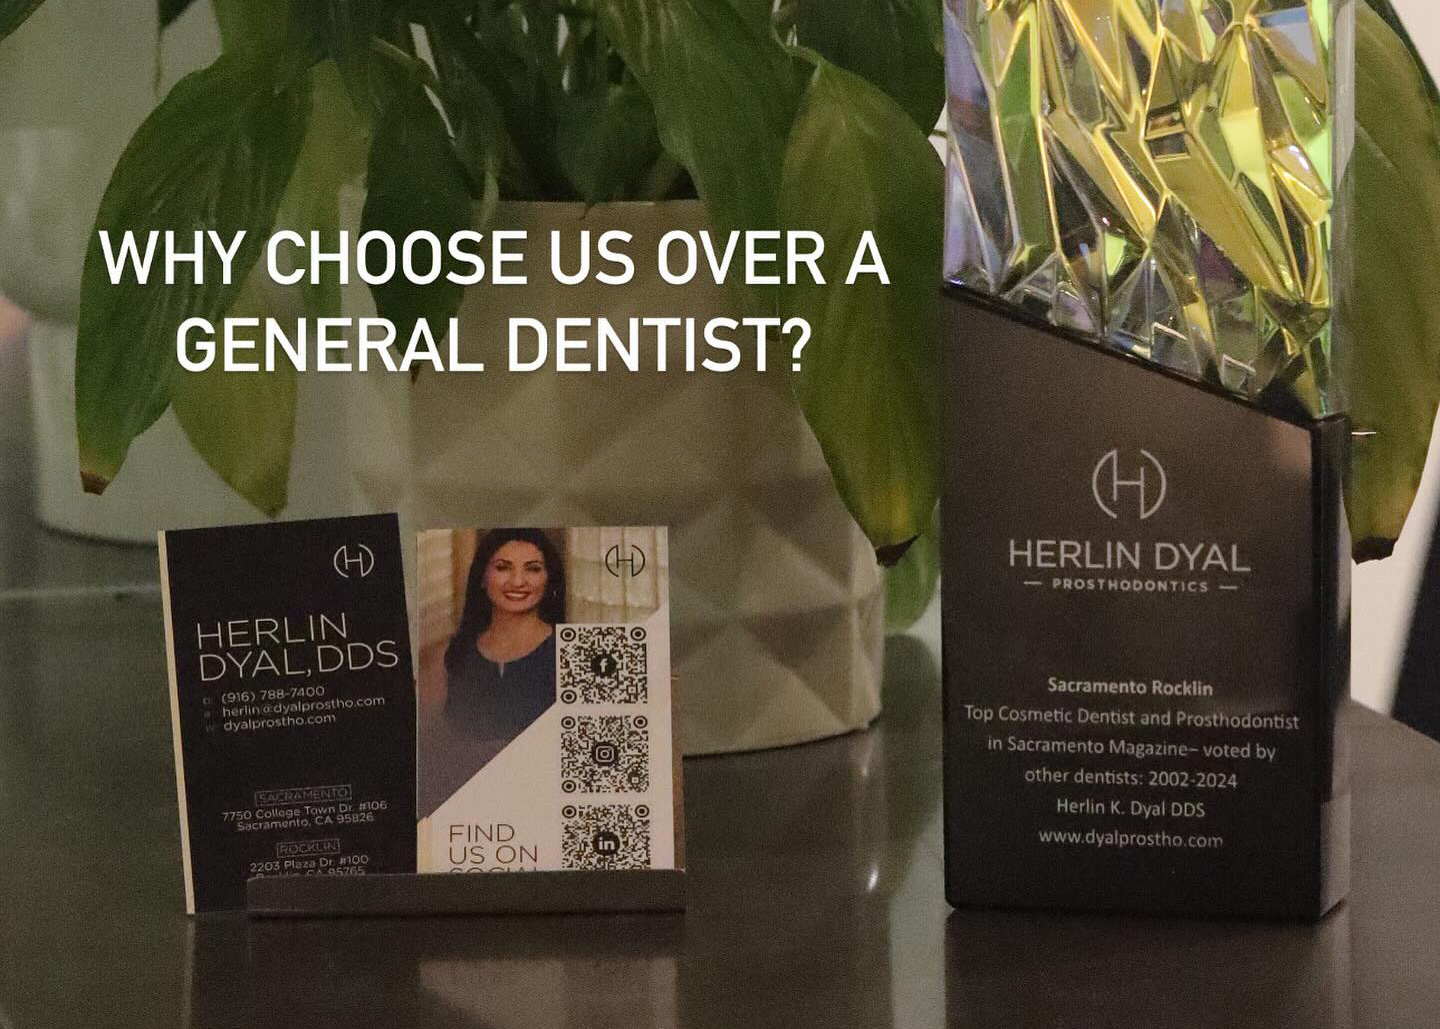 Why Choose Us Over a General Dentist?